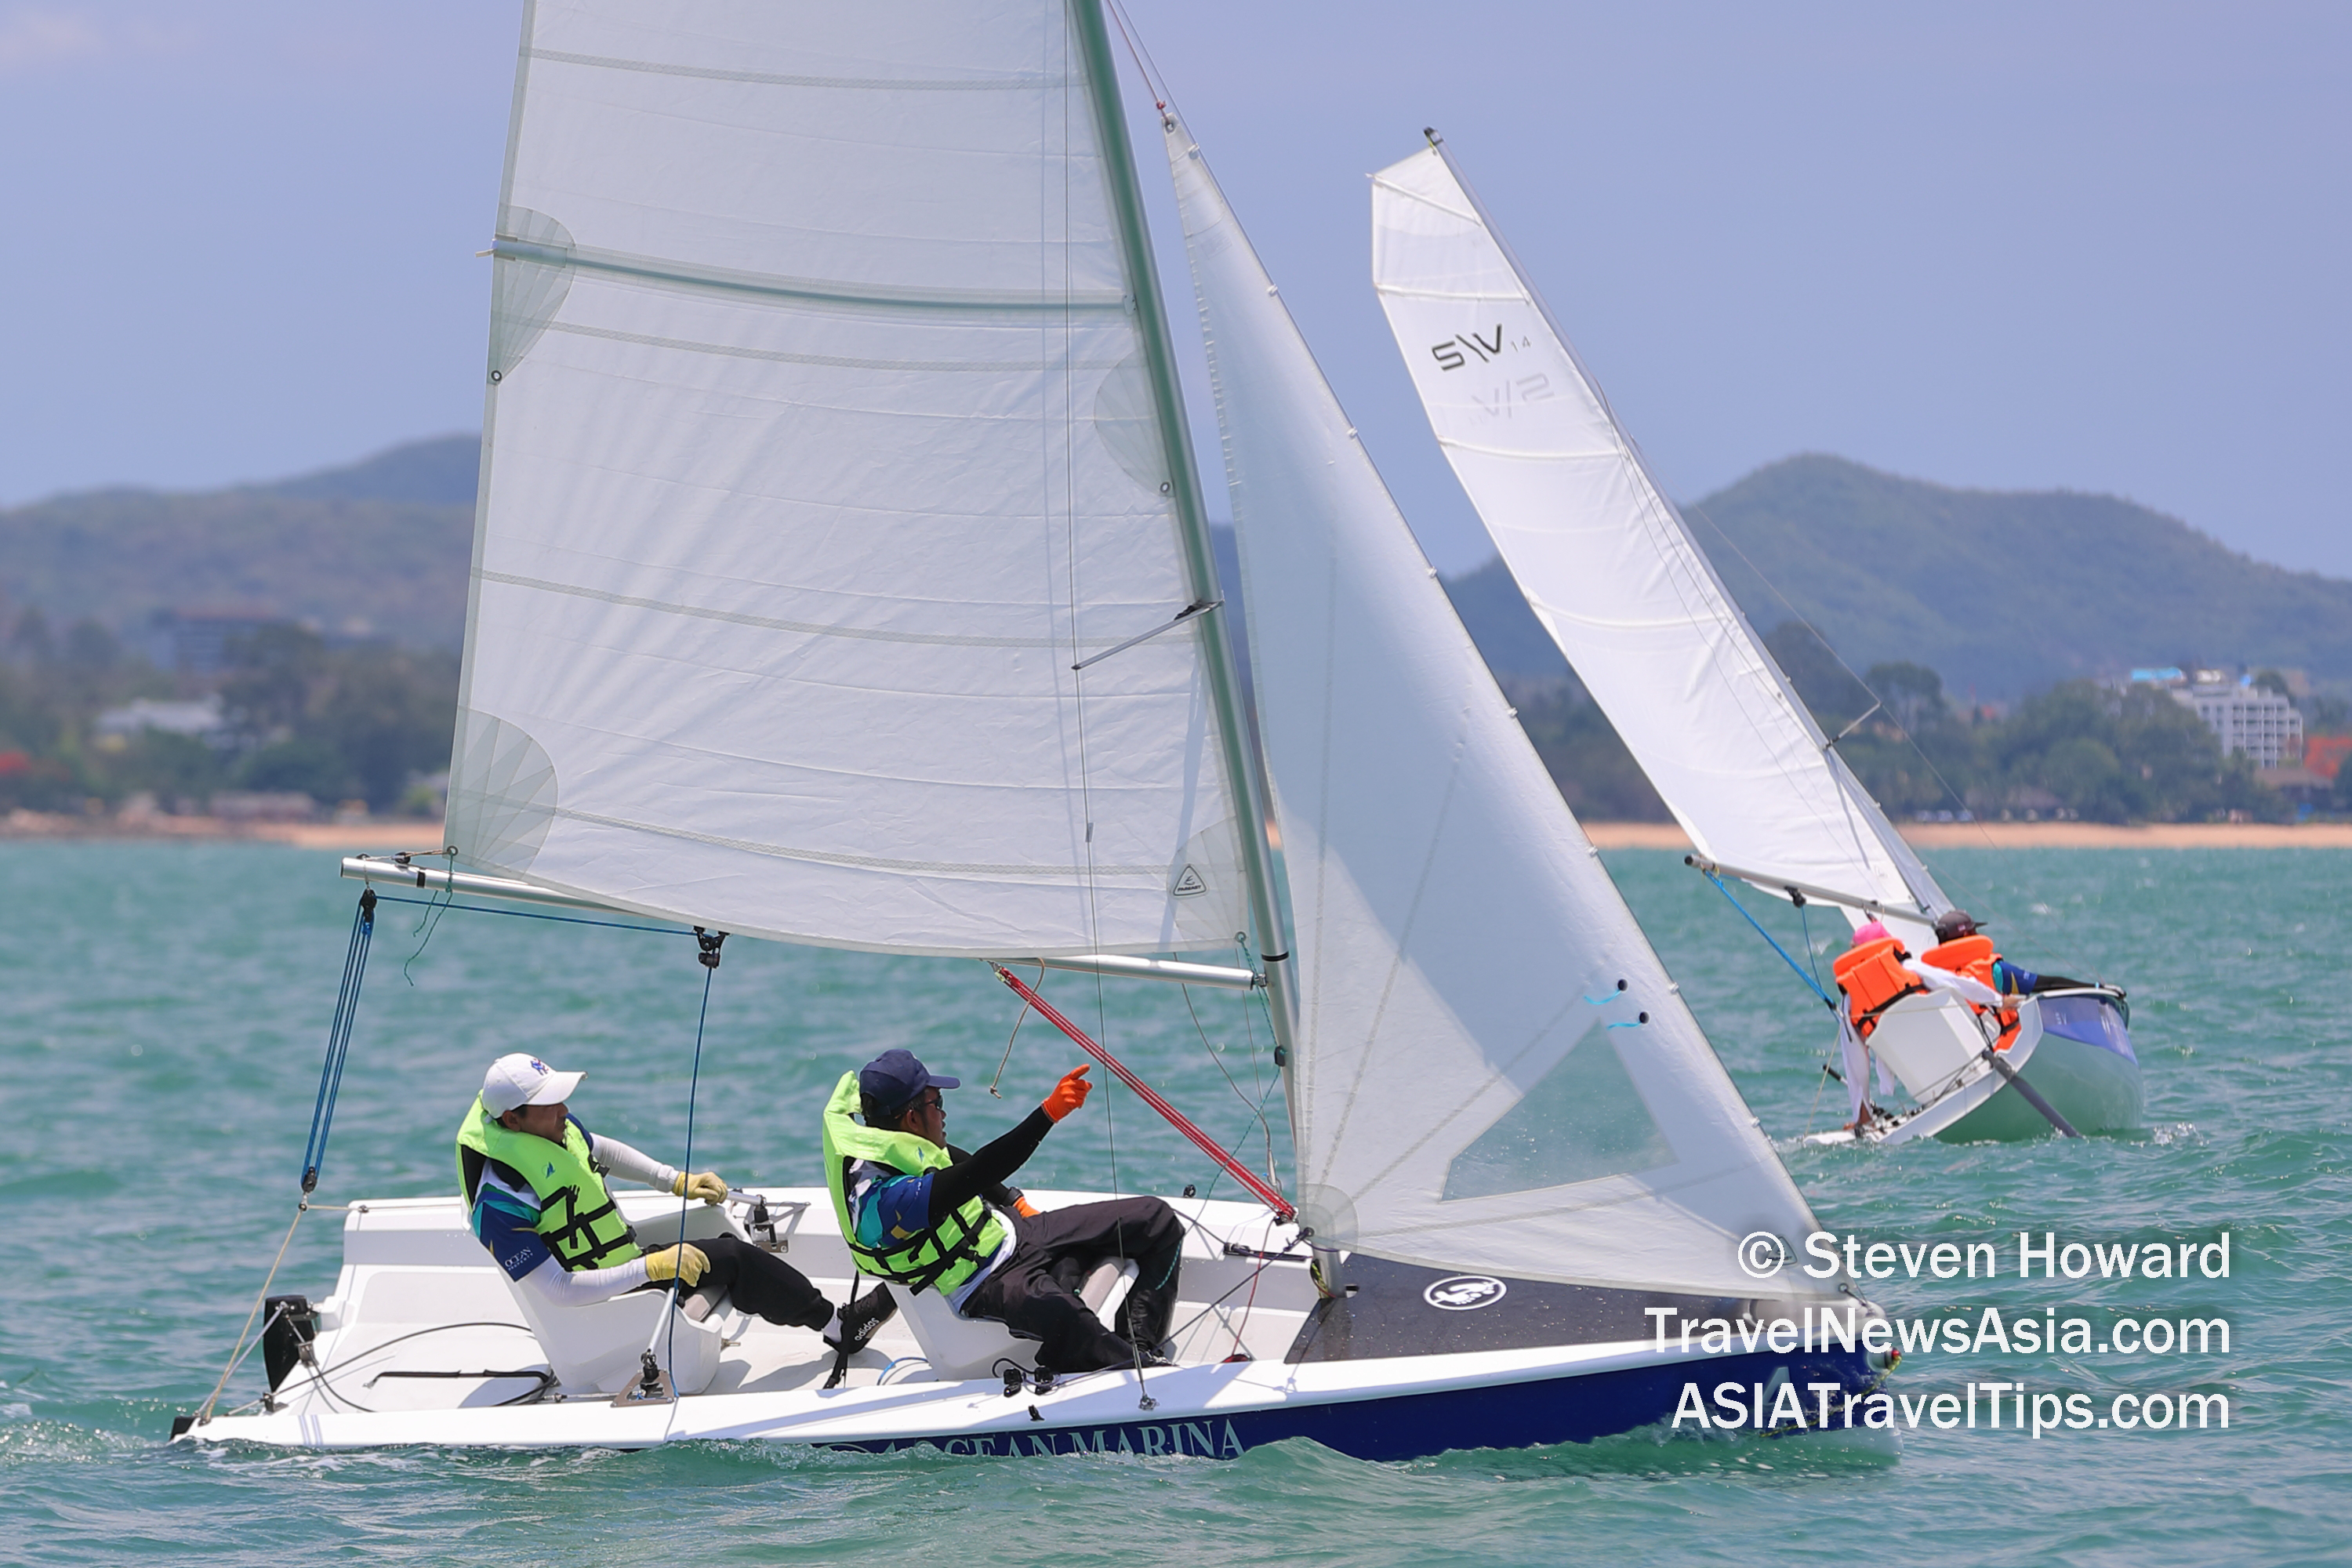 Two races wrapped up a fun and competitive four-day series for the Para Sailing class and inaugural Thailand S\V14 Para Sailing Championship at Top of the Gulf Regatta 2019 in Pattaya, Thailand. Picture by Steven Howard of TravelNewsAsia.com Click to enlarge.